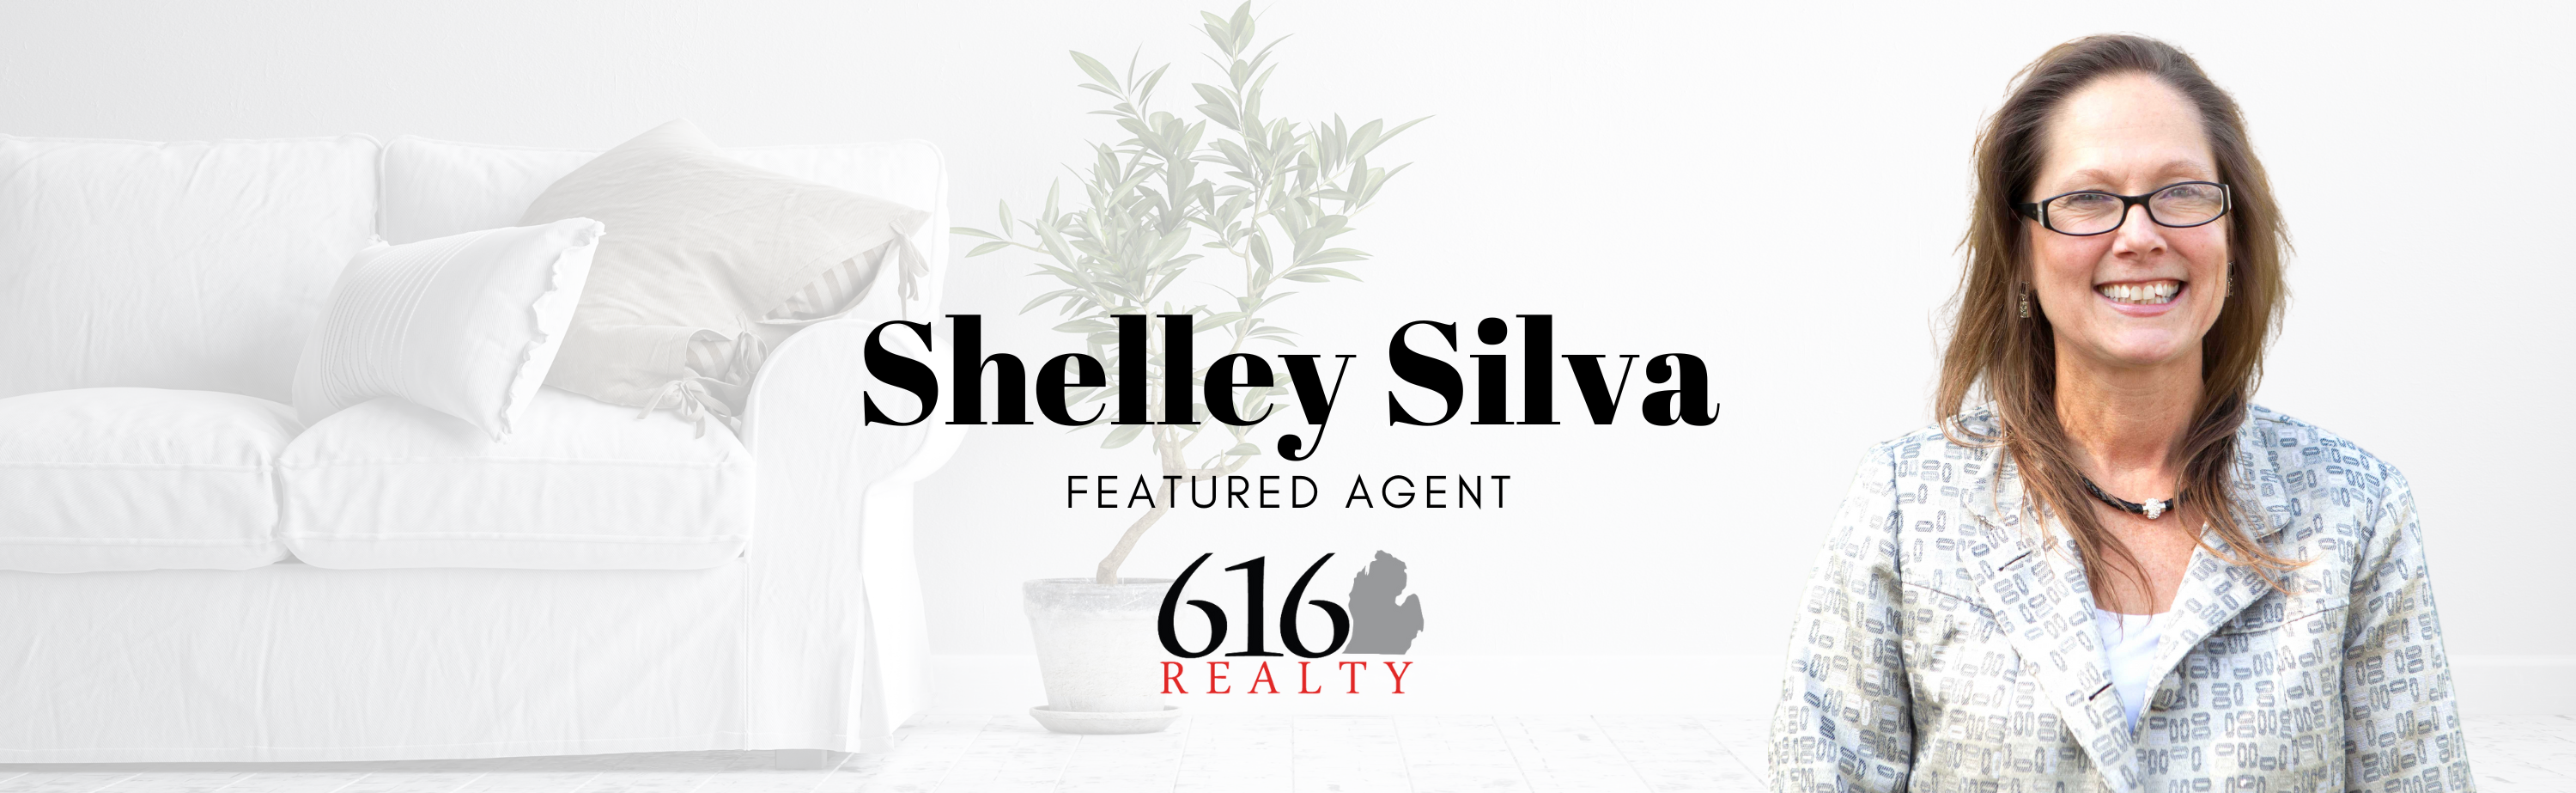 Shelley Silva - Featured Agent